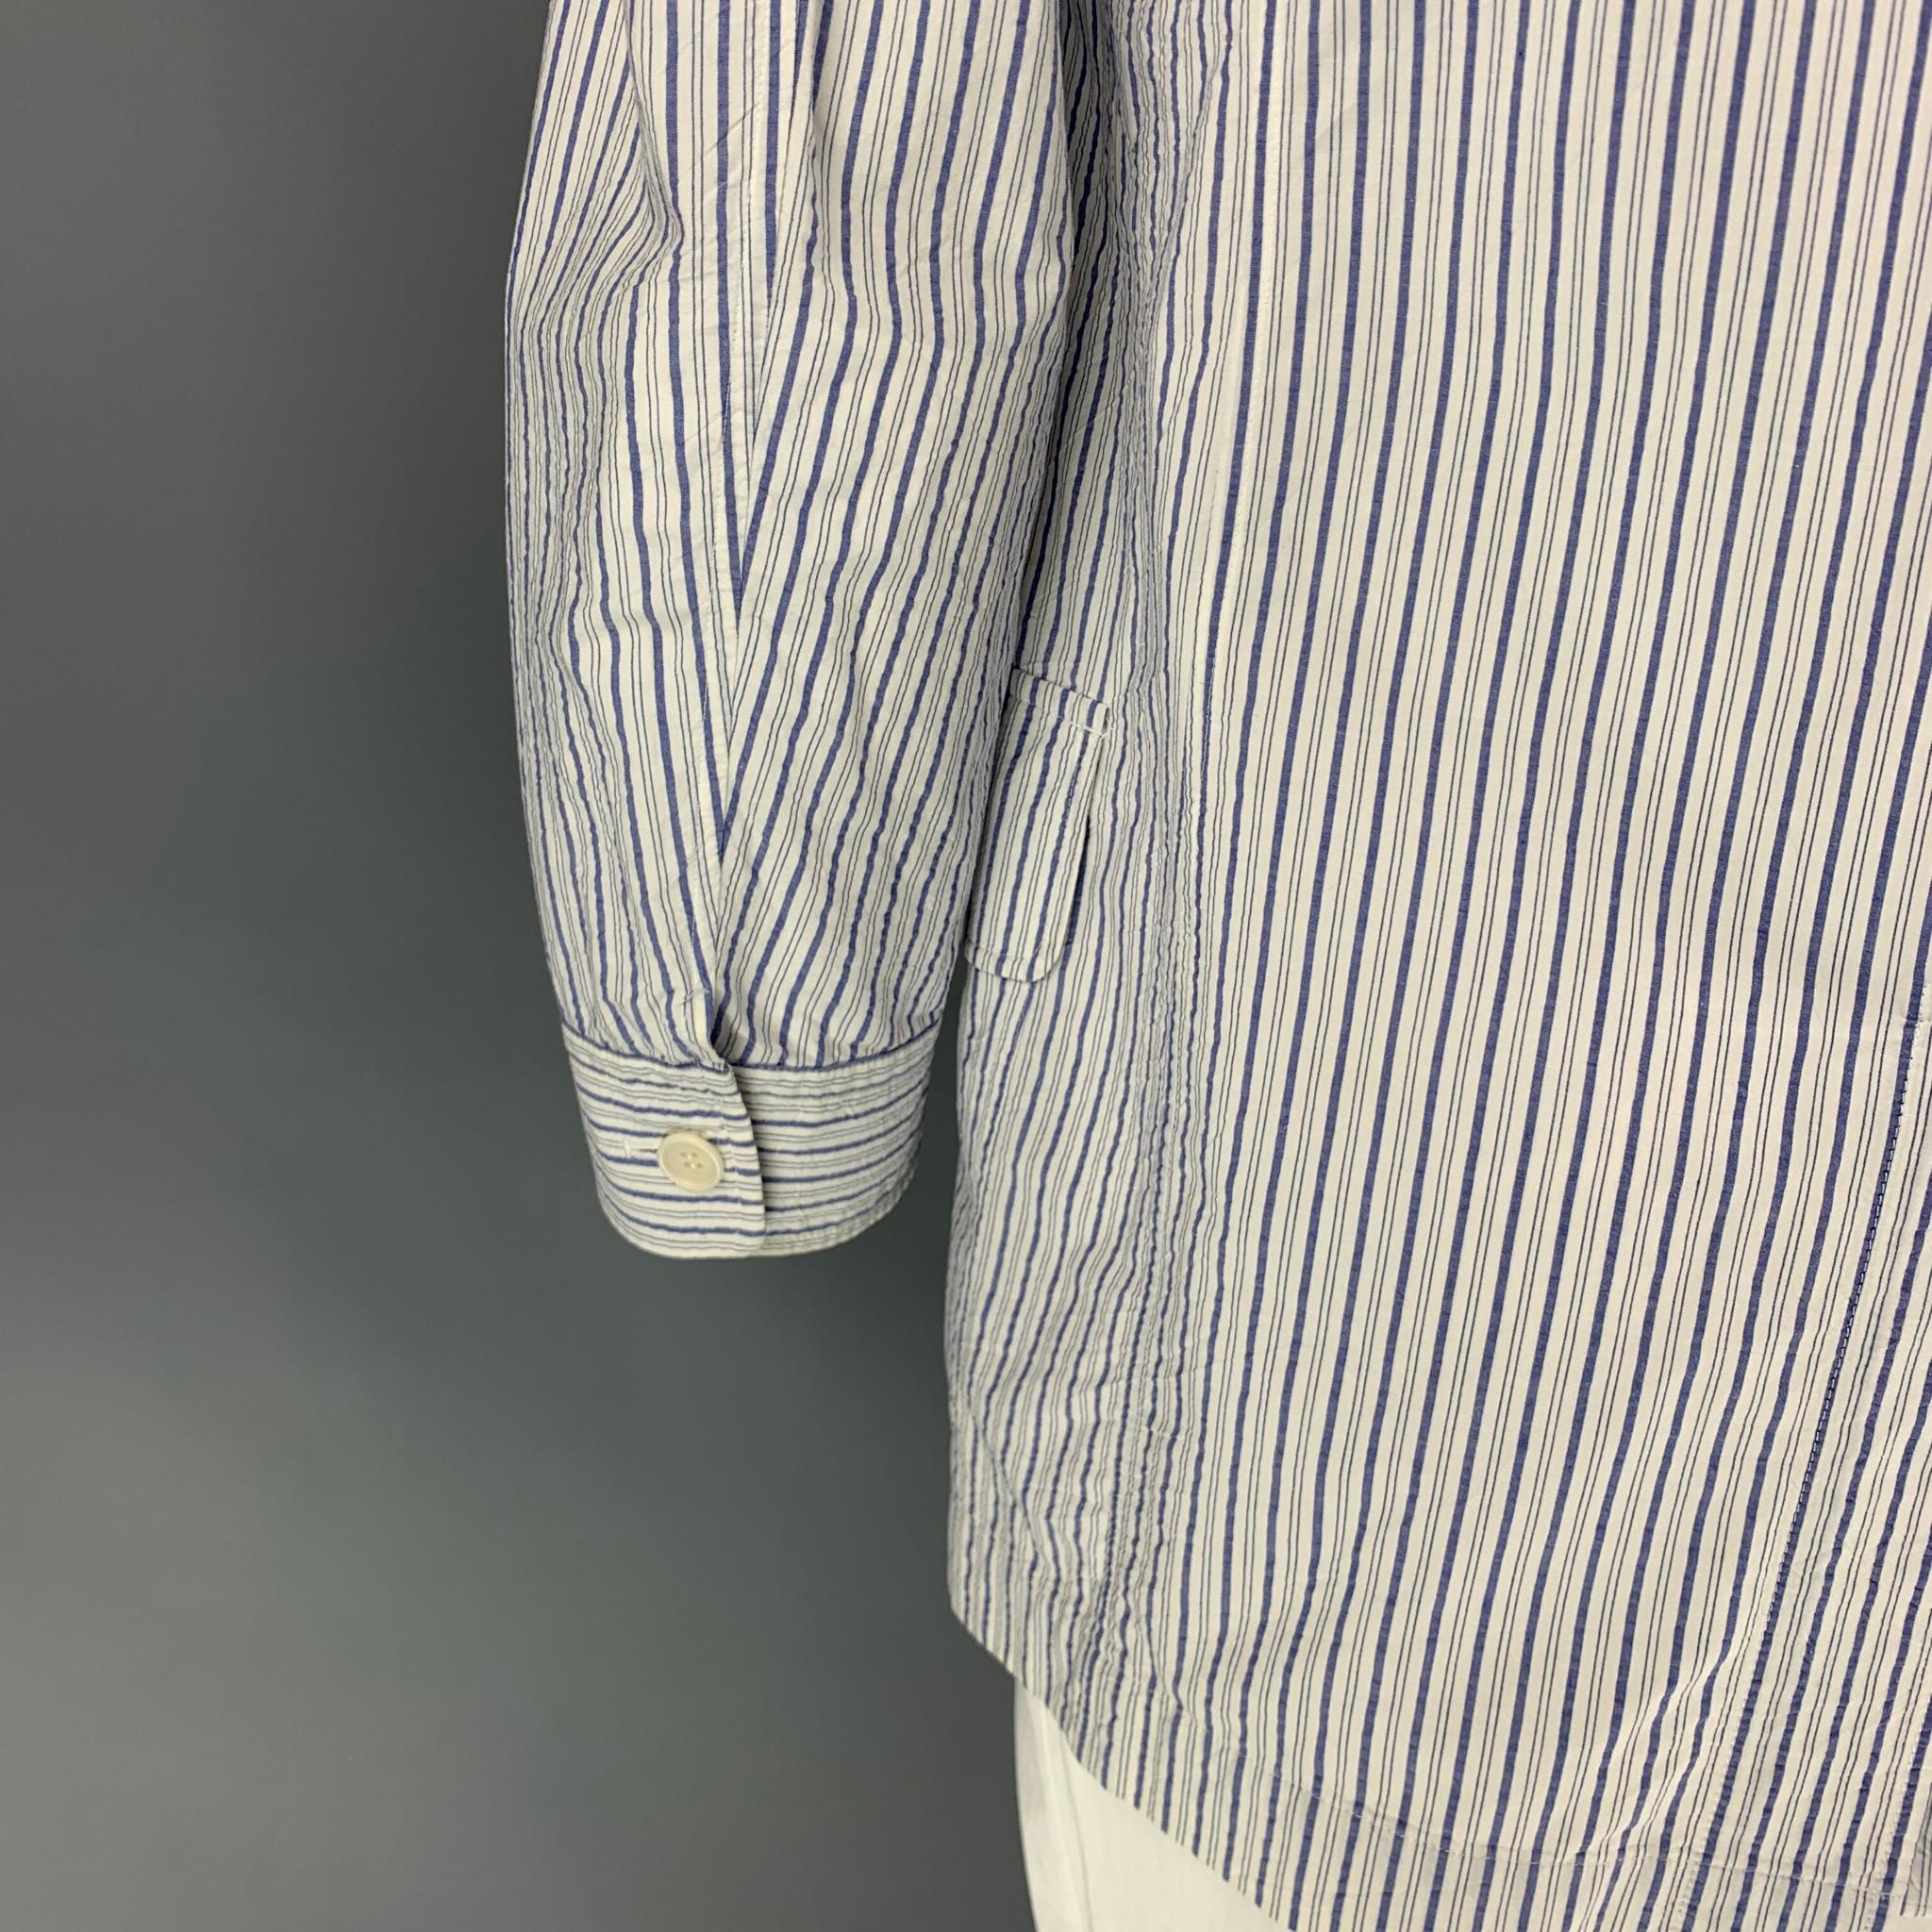 ISSEY MIYAKE sport coat comes in a white & blue stripe cotton featuring a notch lapel, patch pockets, and a three button closure. Made in Japan.

Good Pre-Owned Condition. Moderate discoloration at collar.
Marked: JP 4

Measurements:

Shoulder: 19.5